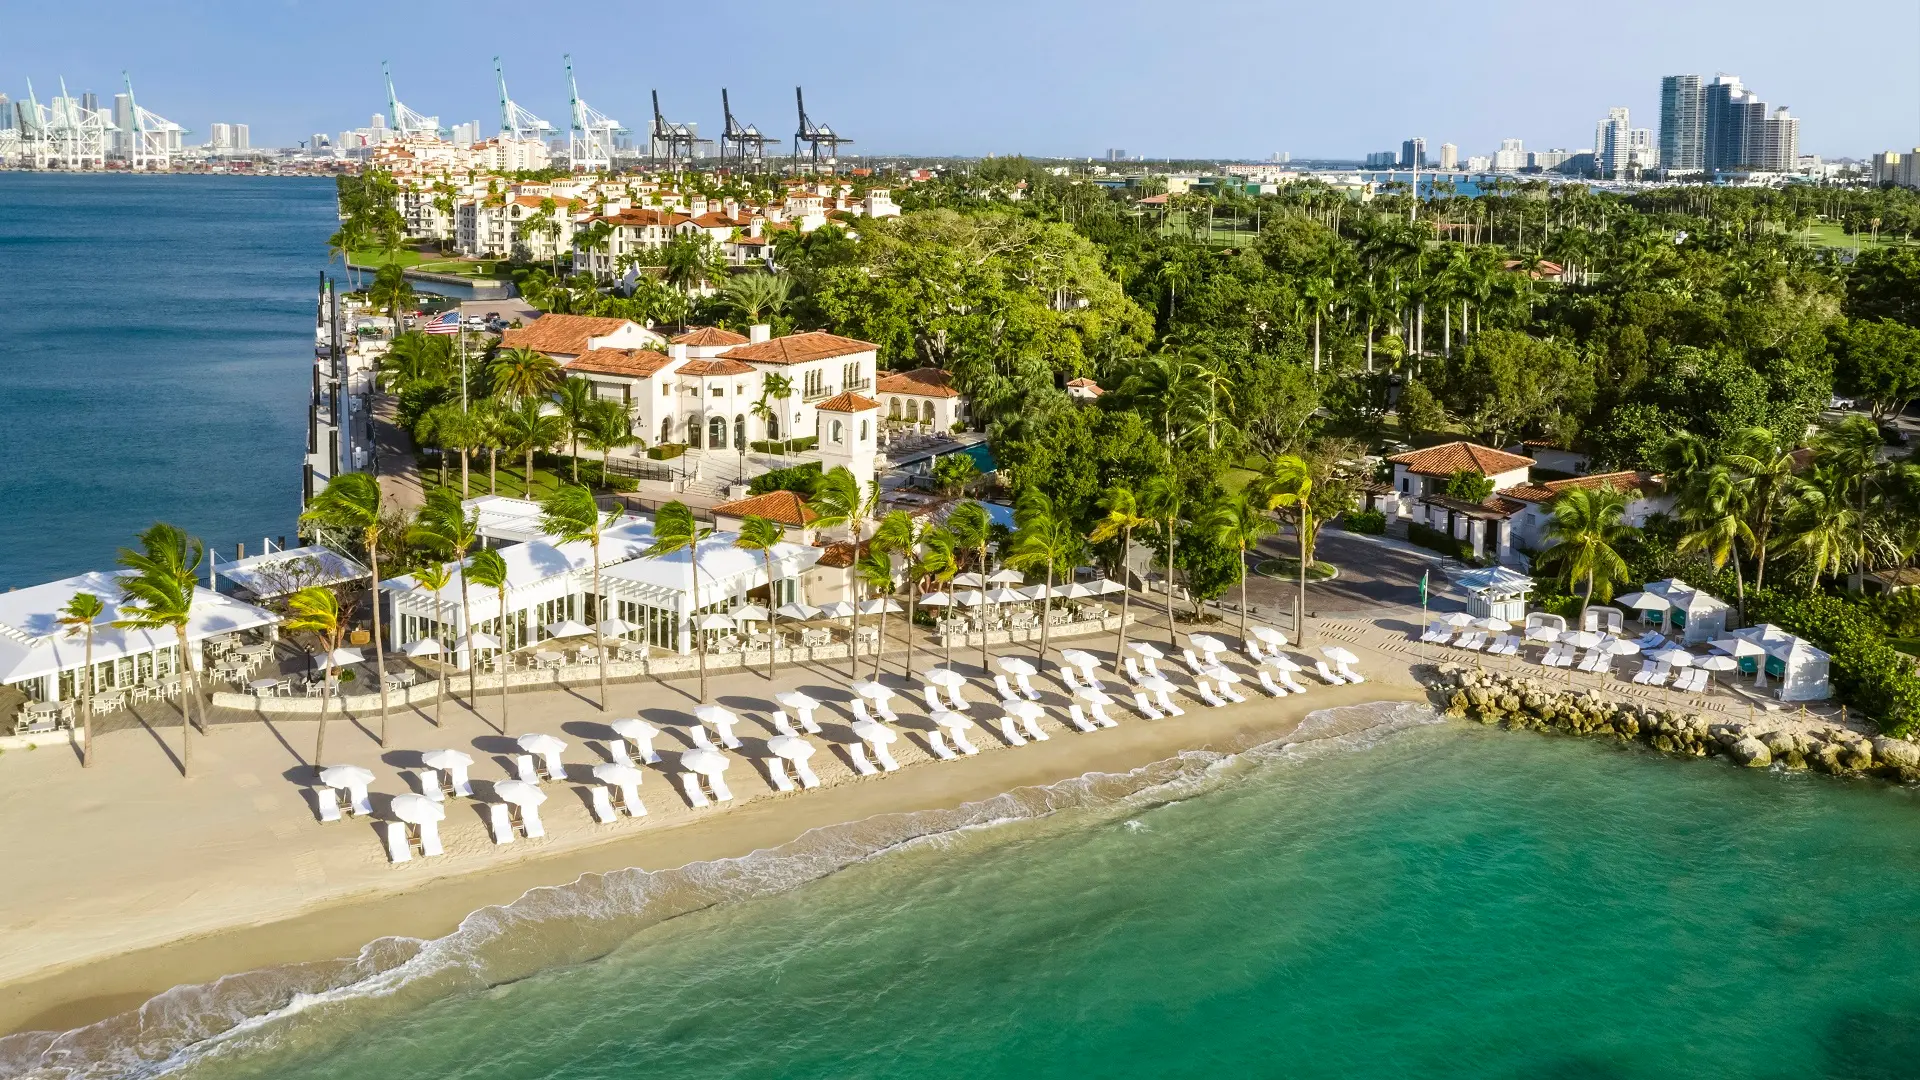 Hotel review Location' - Fisher Island Club and Hotel - 0